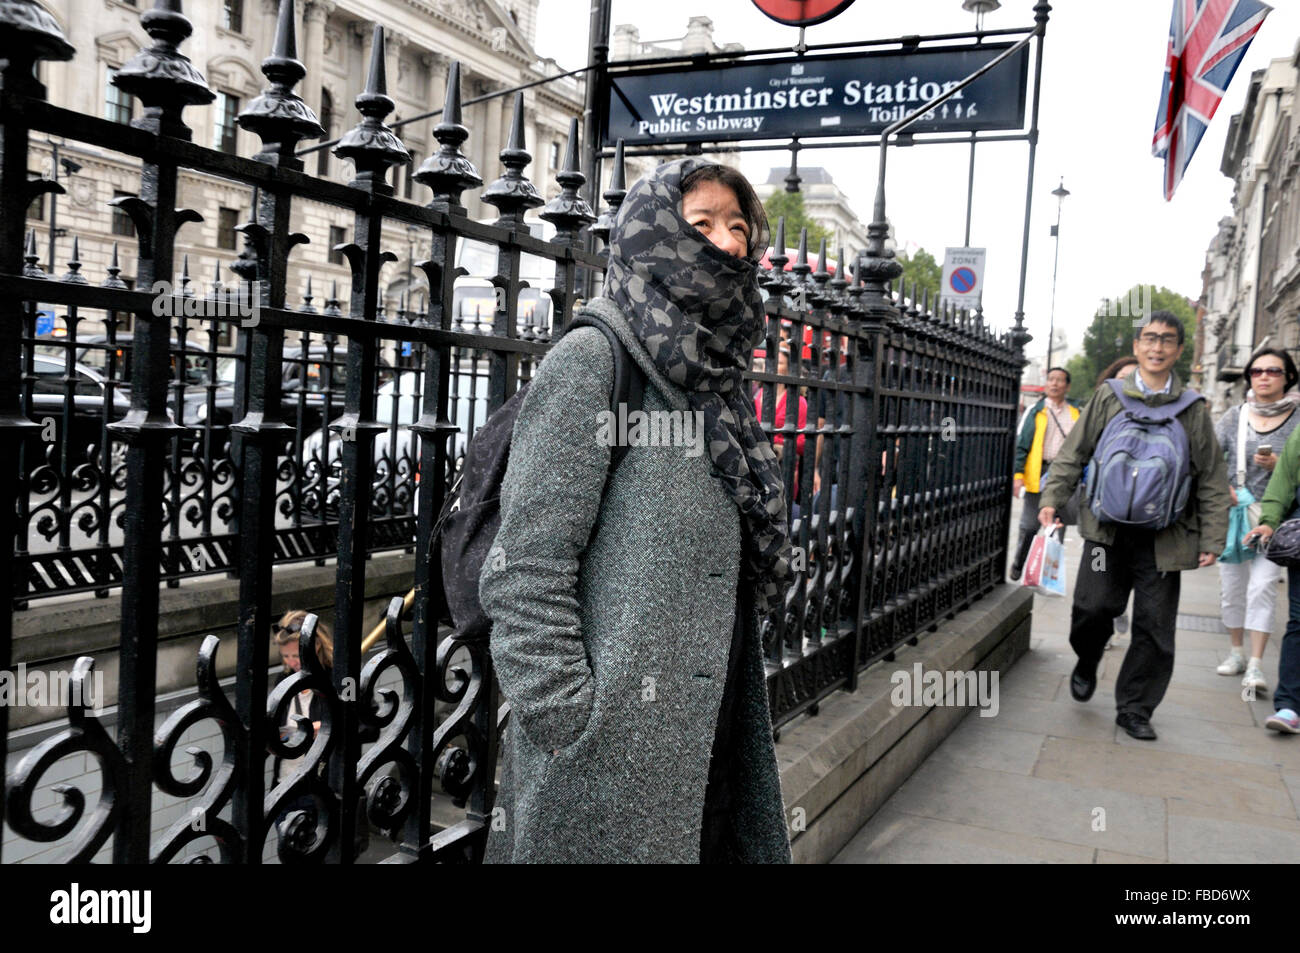 London, England, UK. Woman with a headscarf at Westminster underground station Stock Photo